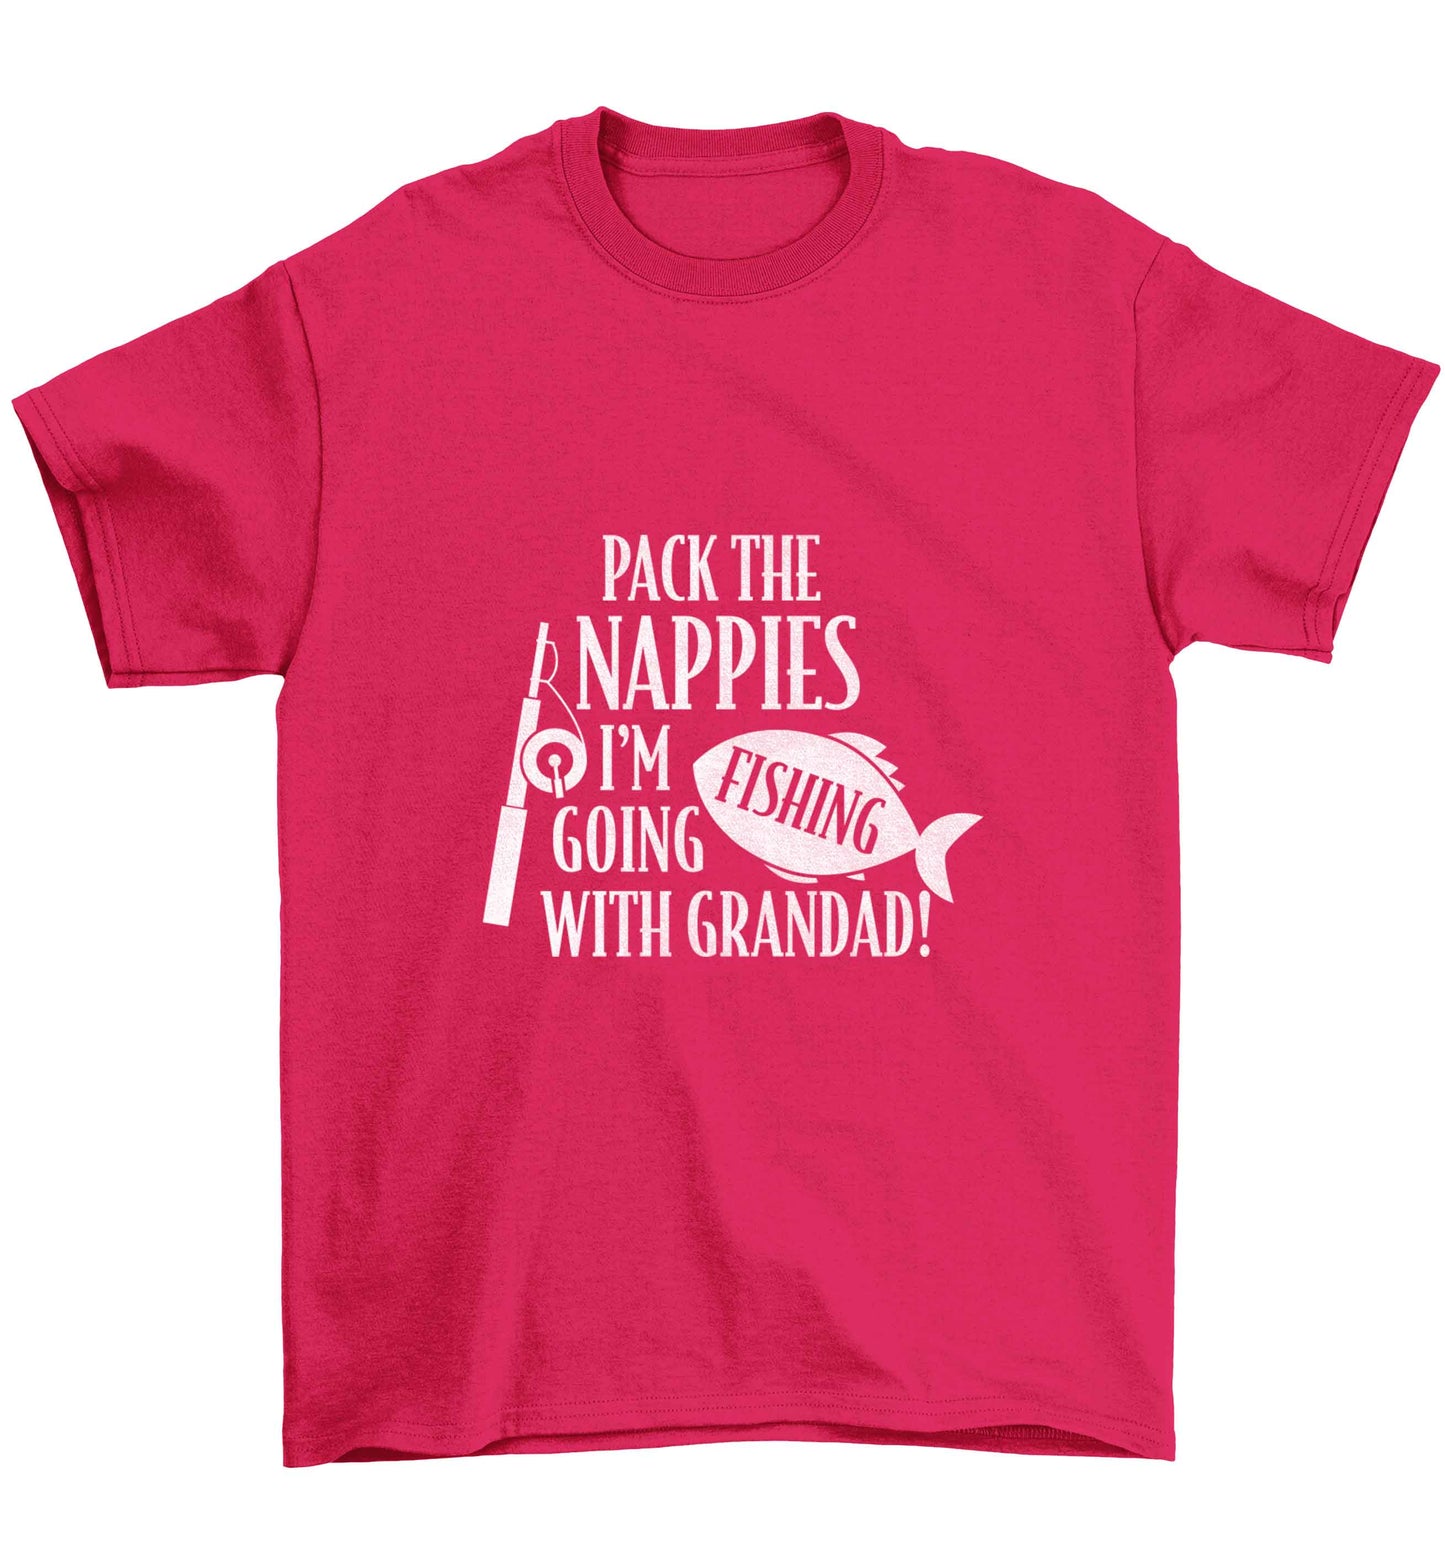 Pack the nappies I'm going fishing with Grandad Children's pink Tshirt 12-13 Years